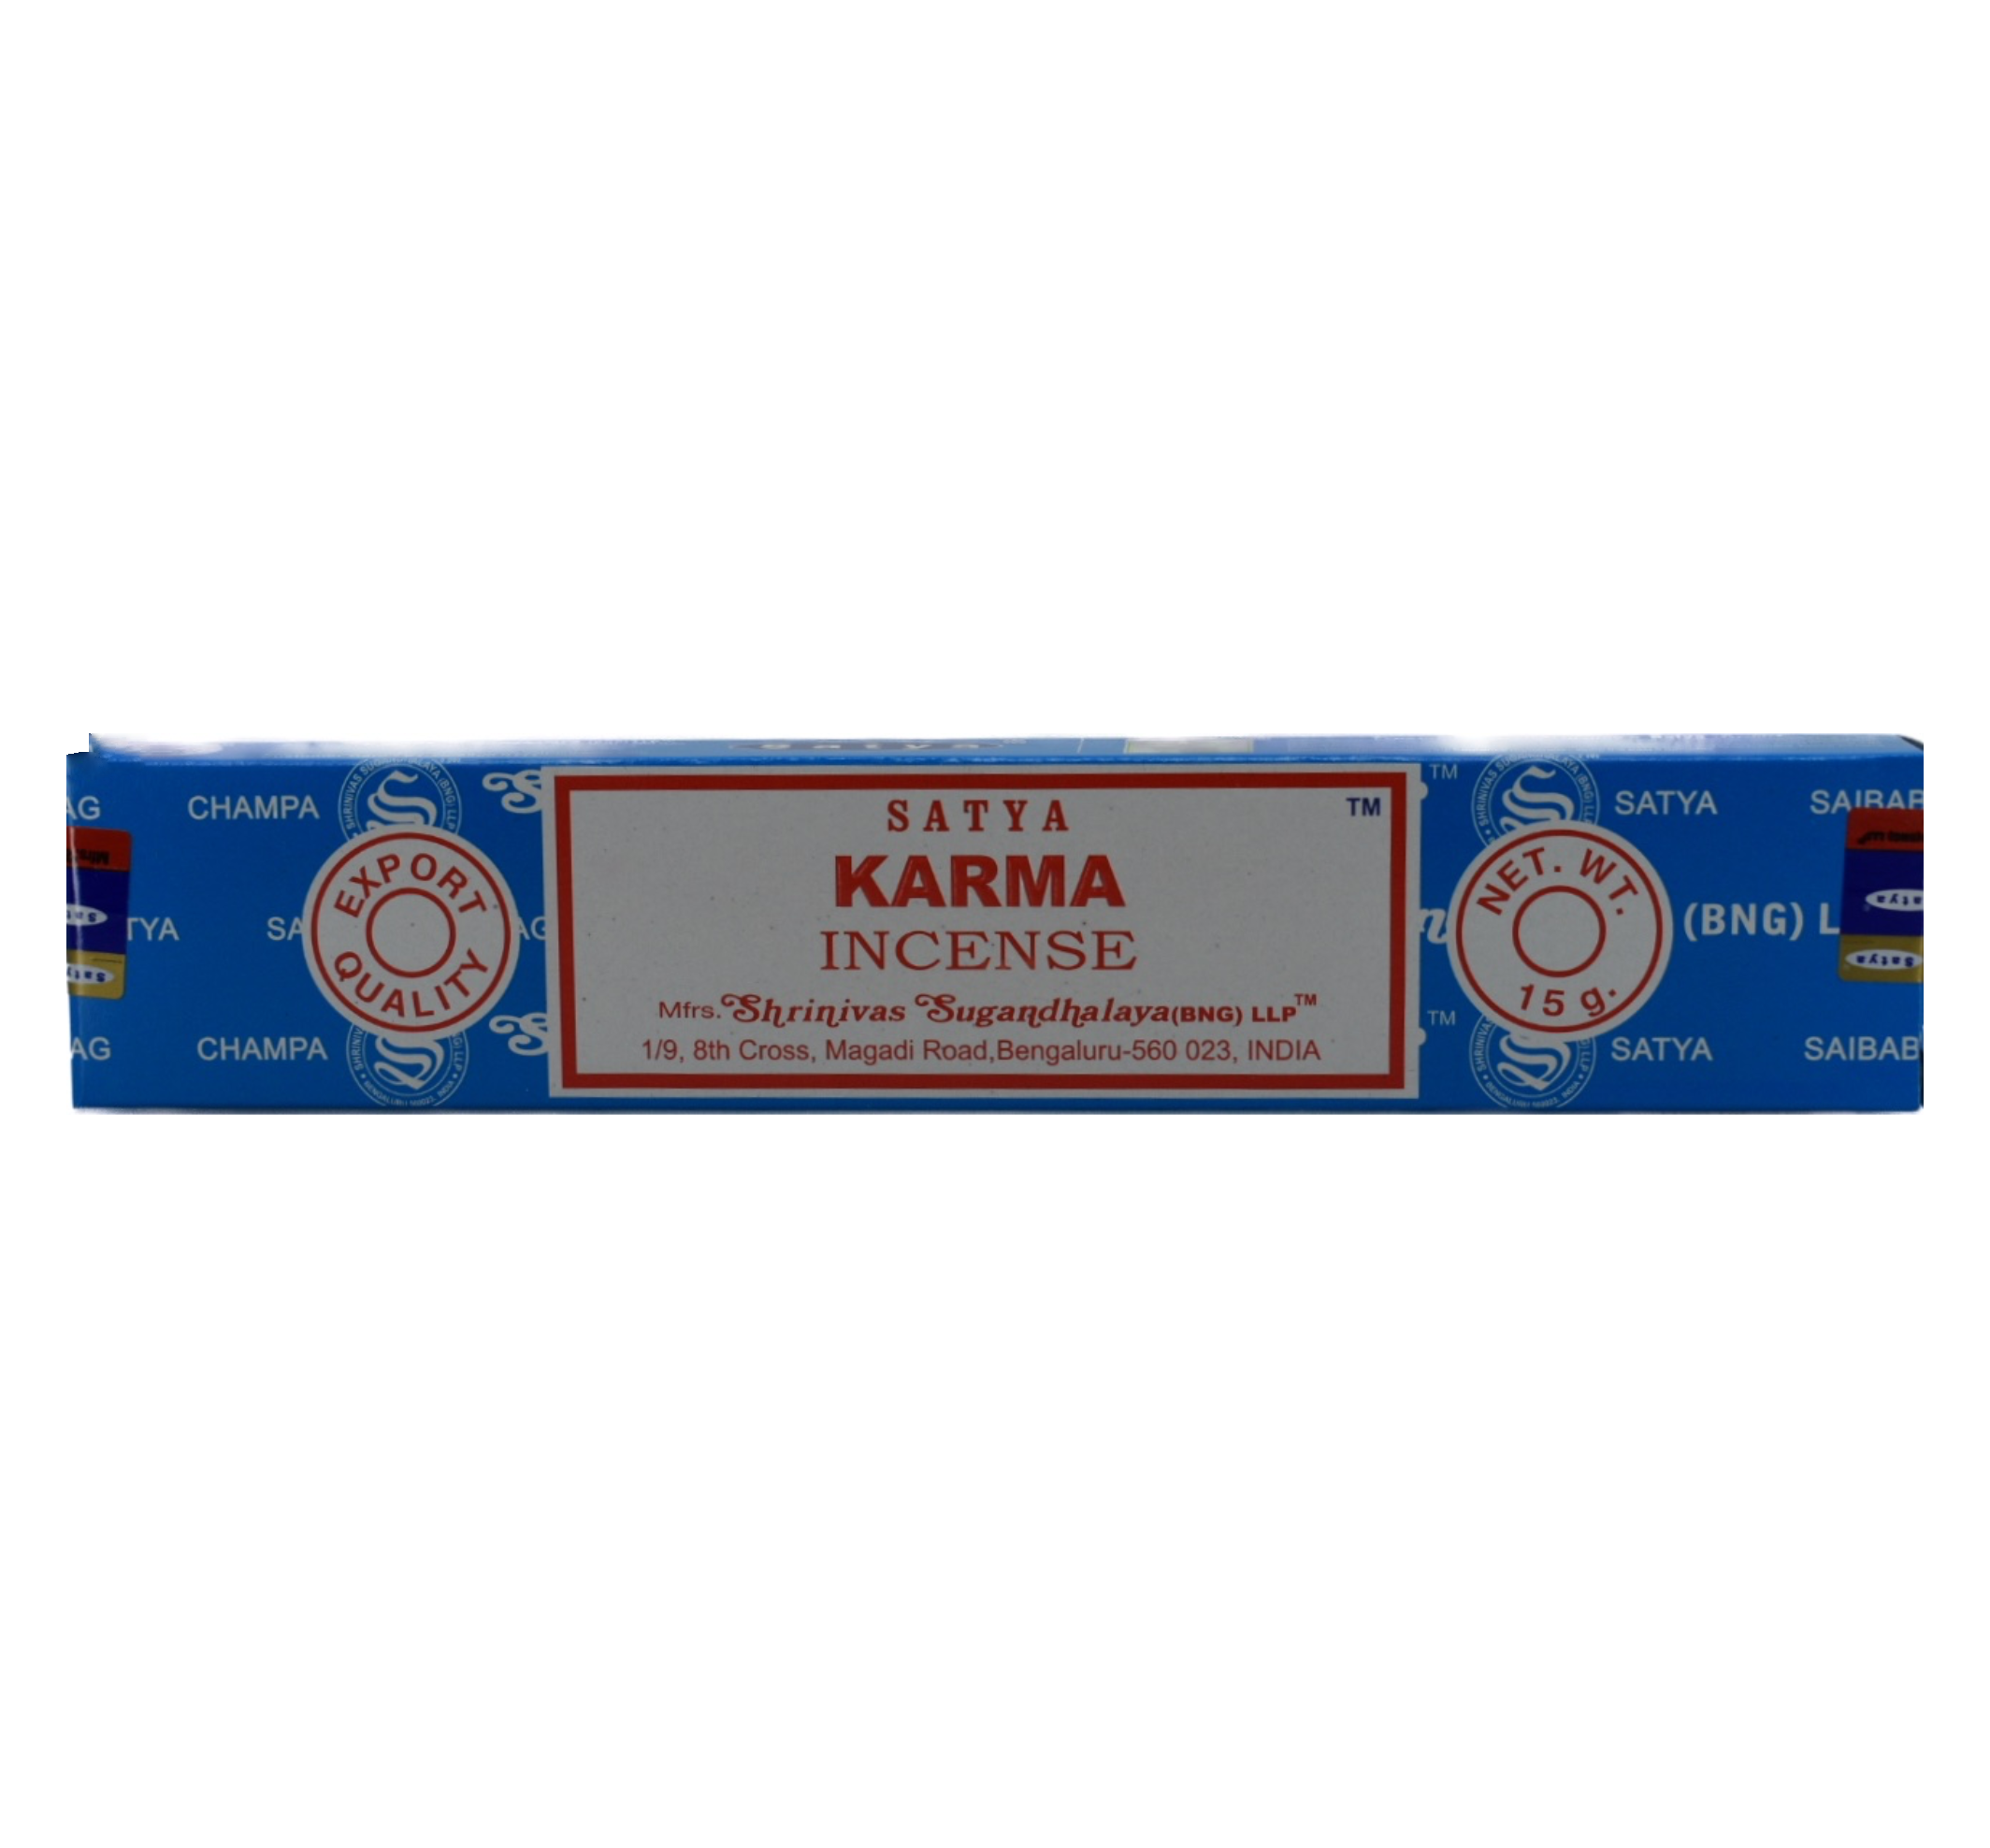 Karma 15gr Incense Sticks. Box is blue with white lines that have company words as a design. The center of the box has a white rectangle with a red frame within the border. In the rectangle the top line has the company name. The next rows have the title Karma Incense. At the bottom of the rectangle is the manufacturer's information. On both sides are a circle. The left circle says Export Quality and the right side circle says Net. Weight 15 grams.